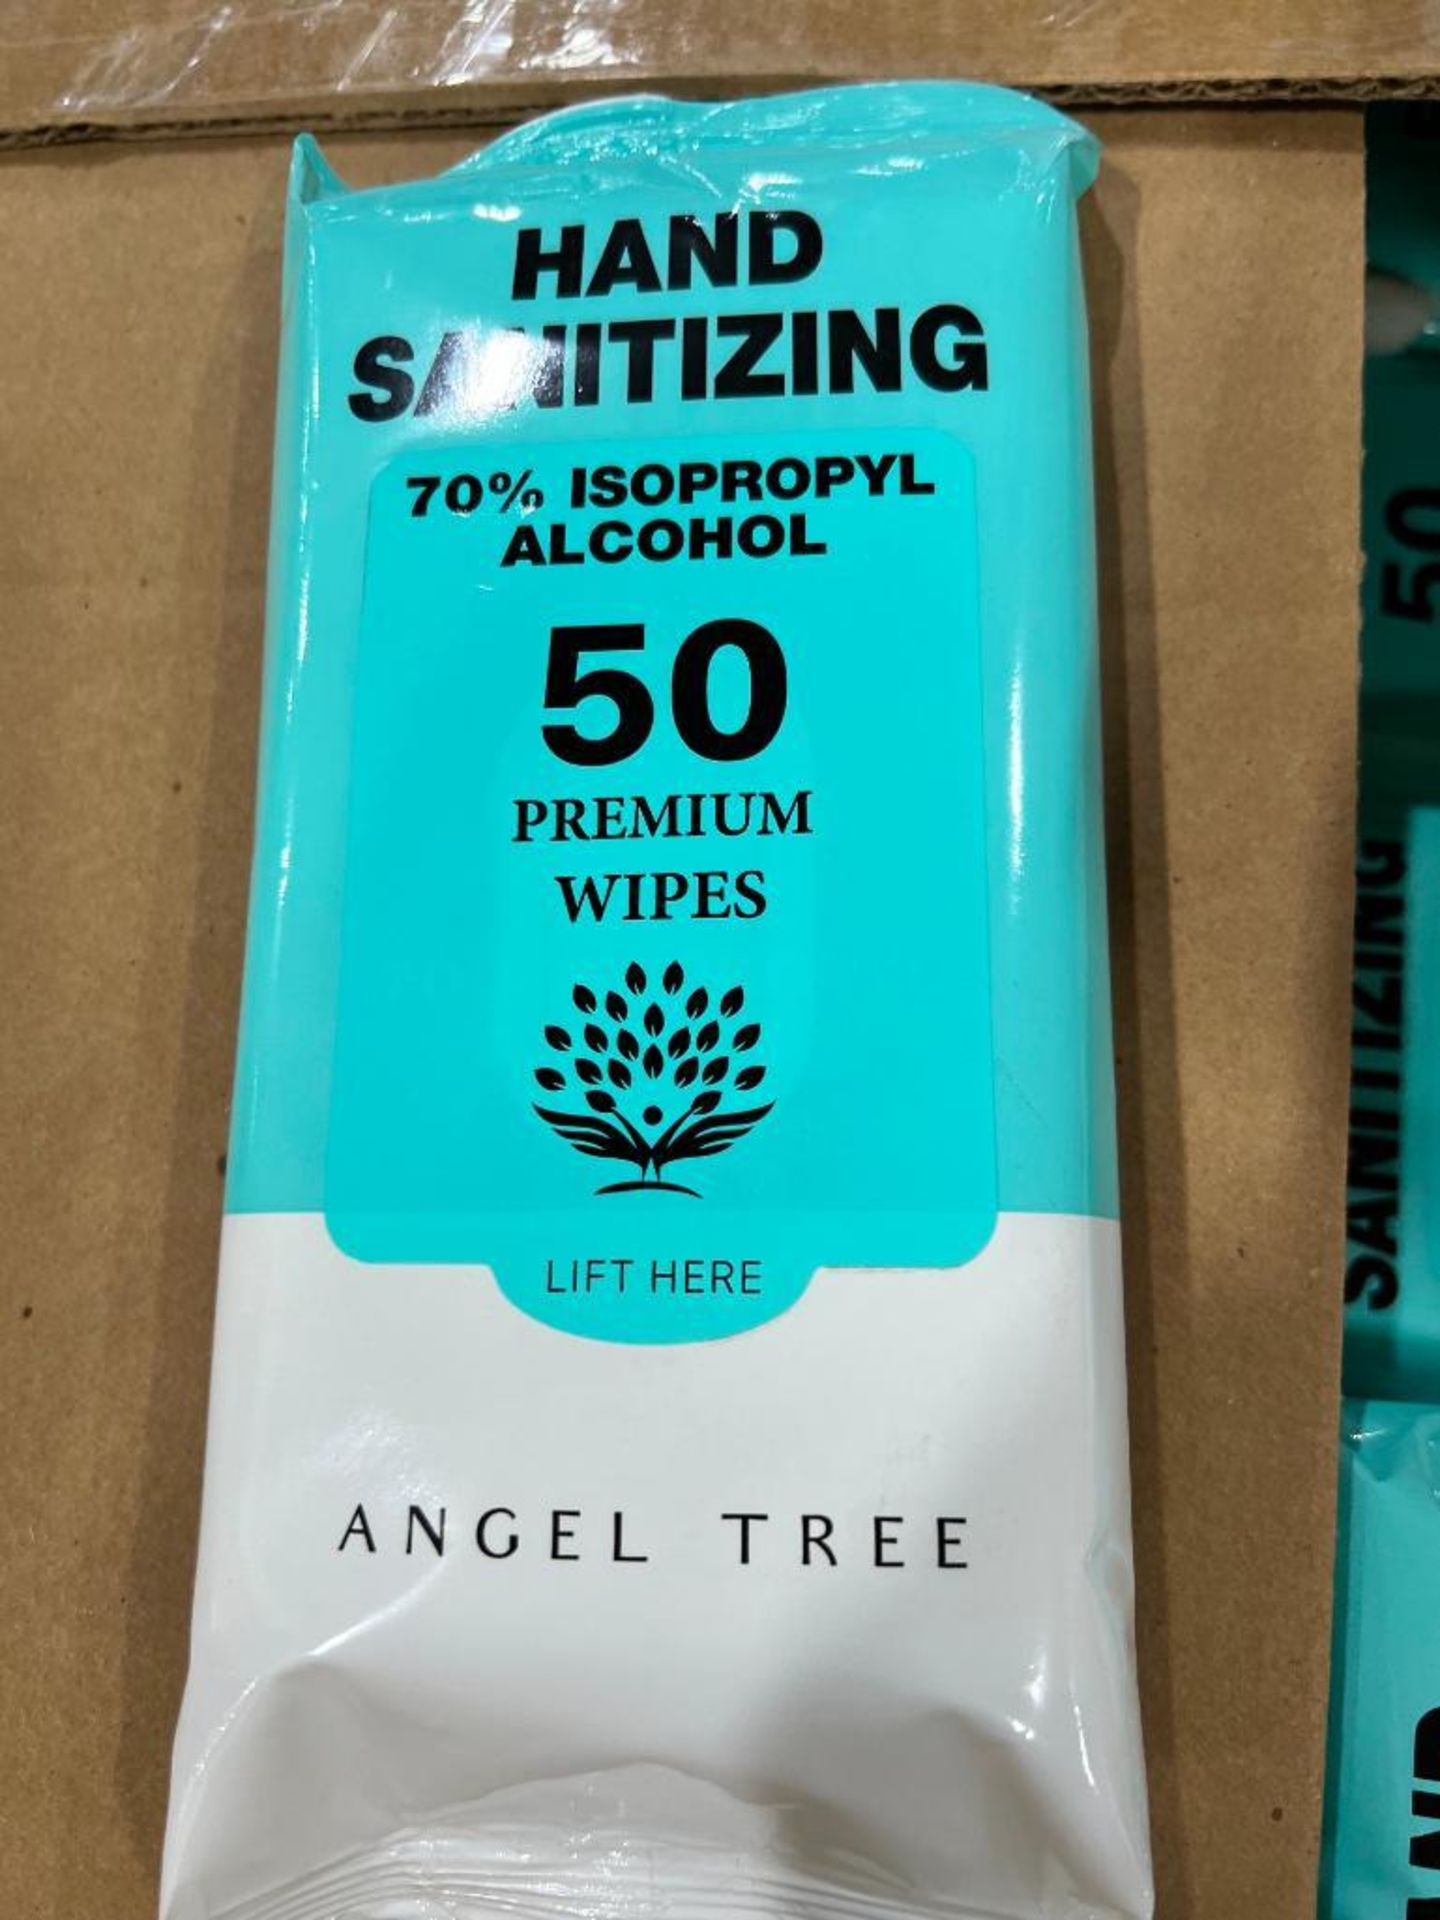 Pallet of Angel Tree Hand Sanitizing Wipes - Image 2 of 2